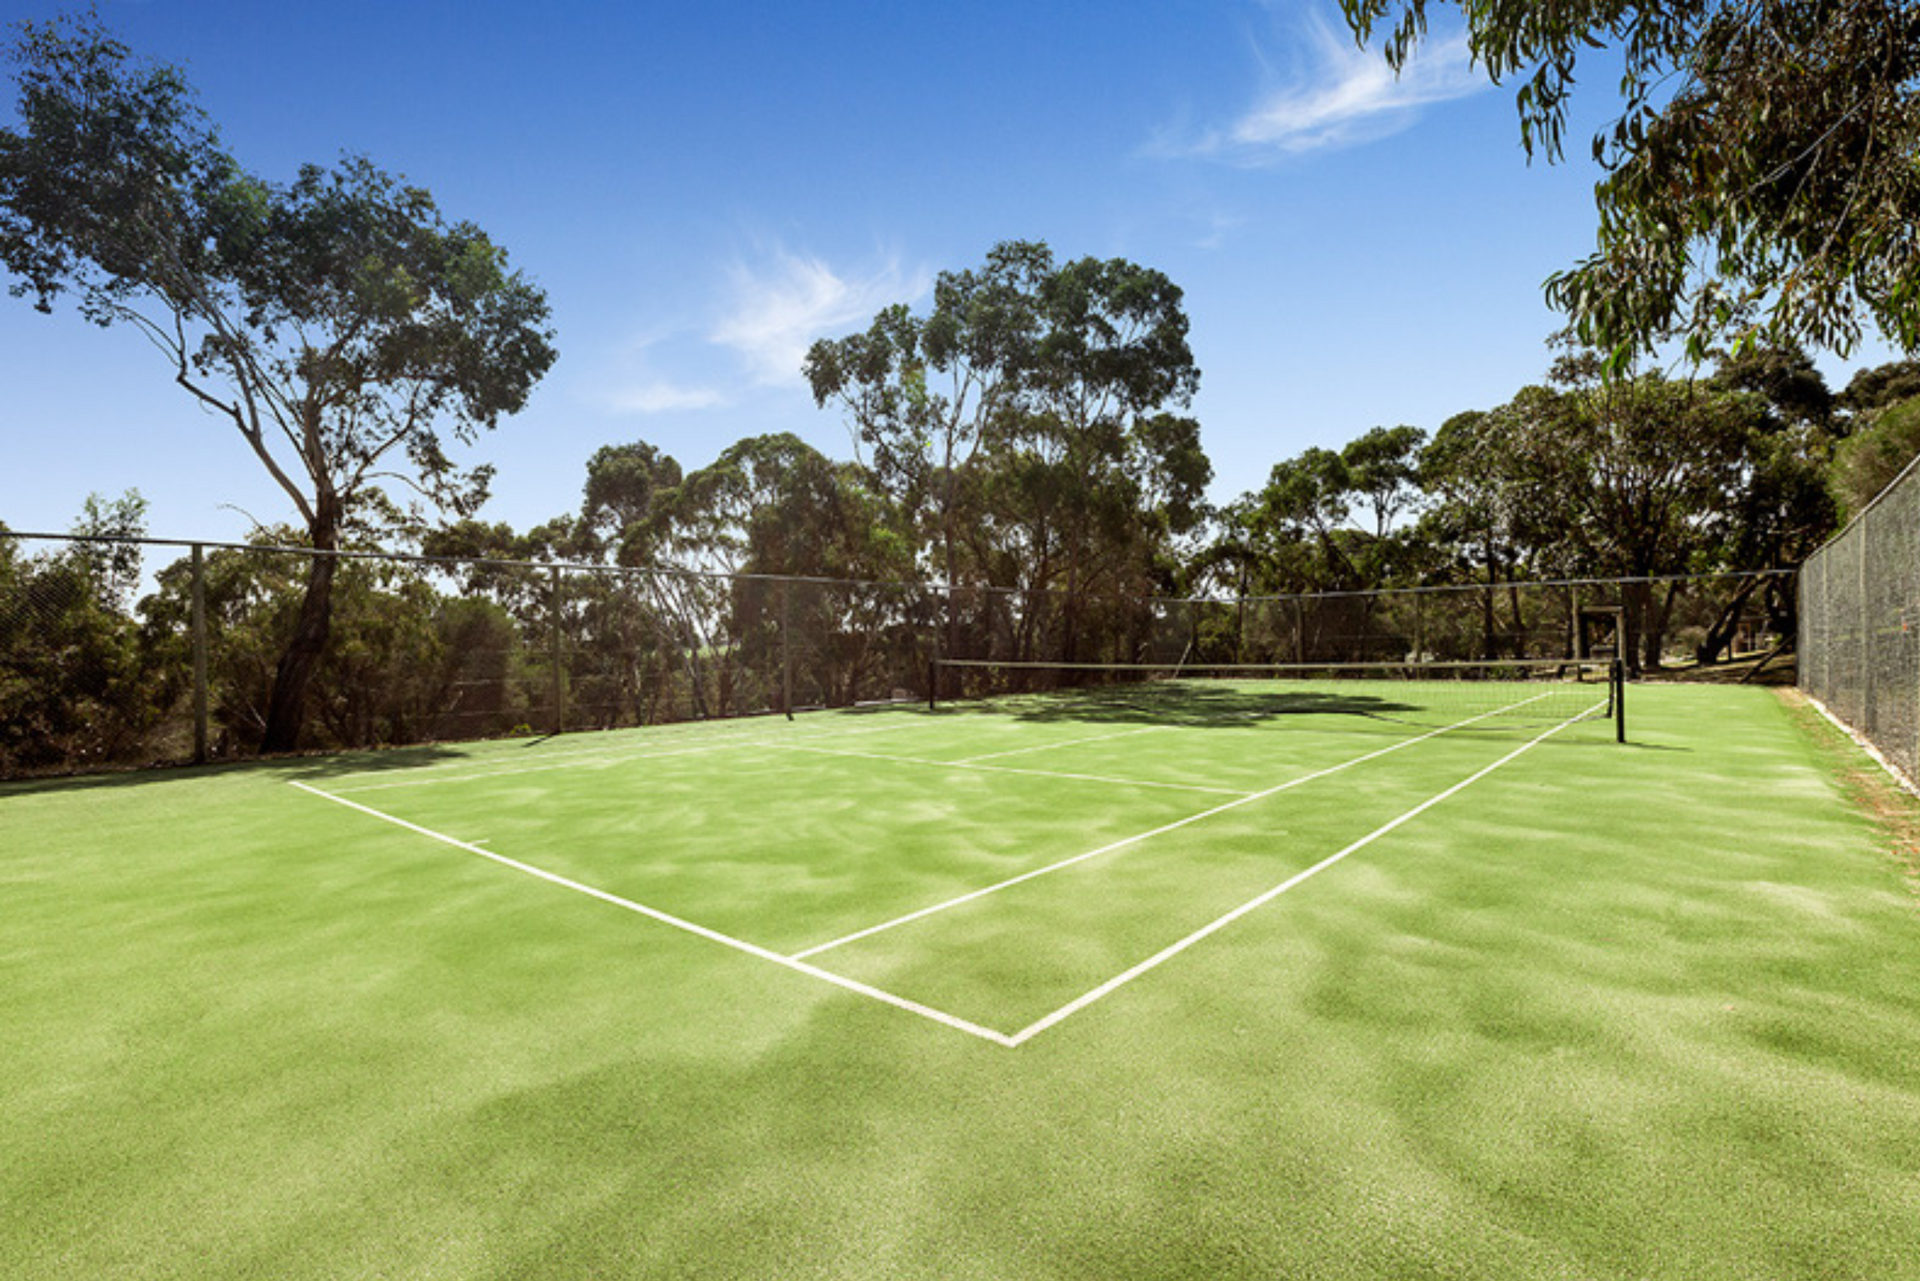 A tennis court with trees in the background on a sunny day